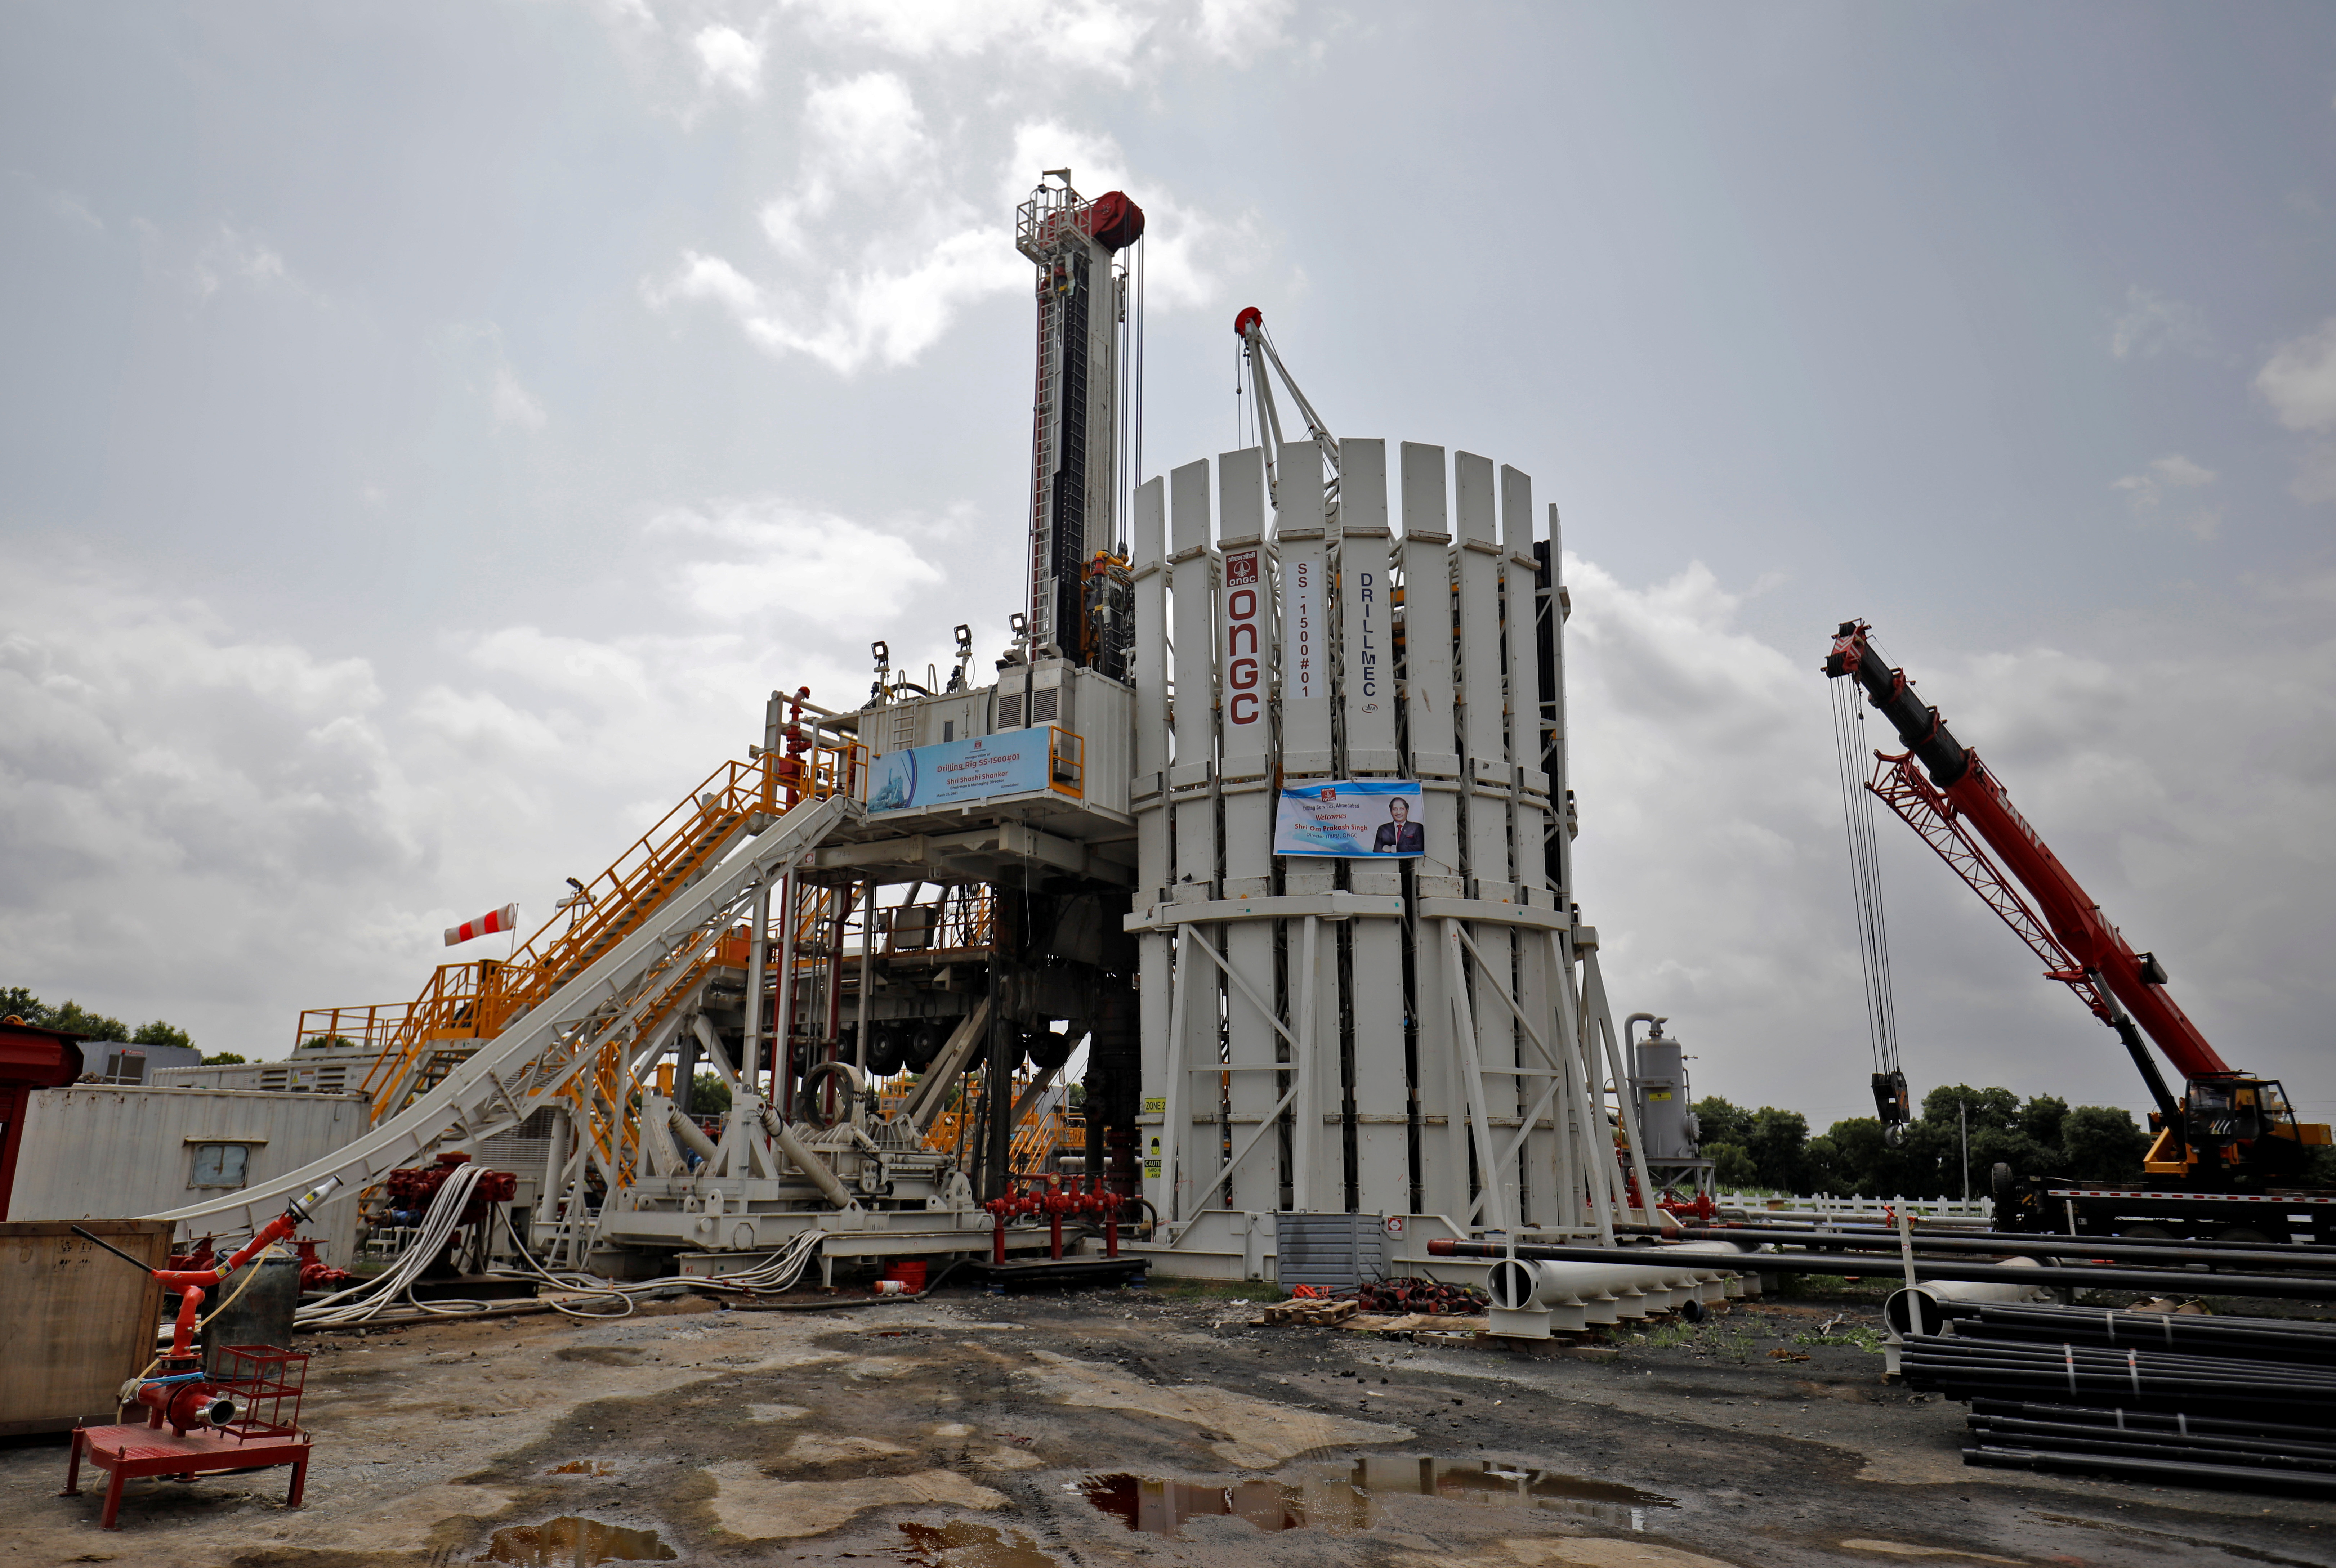 An oil rig manufactured by Megha Engineering and Infrastructures Limited (MEIL) at an Oil and Natural Gas Corp (ONGC) plant, during a media tour of the plant in Dhamasna